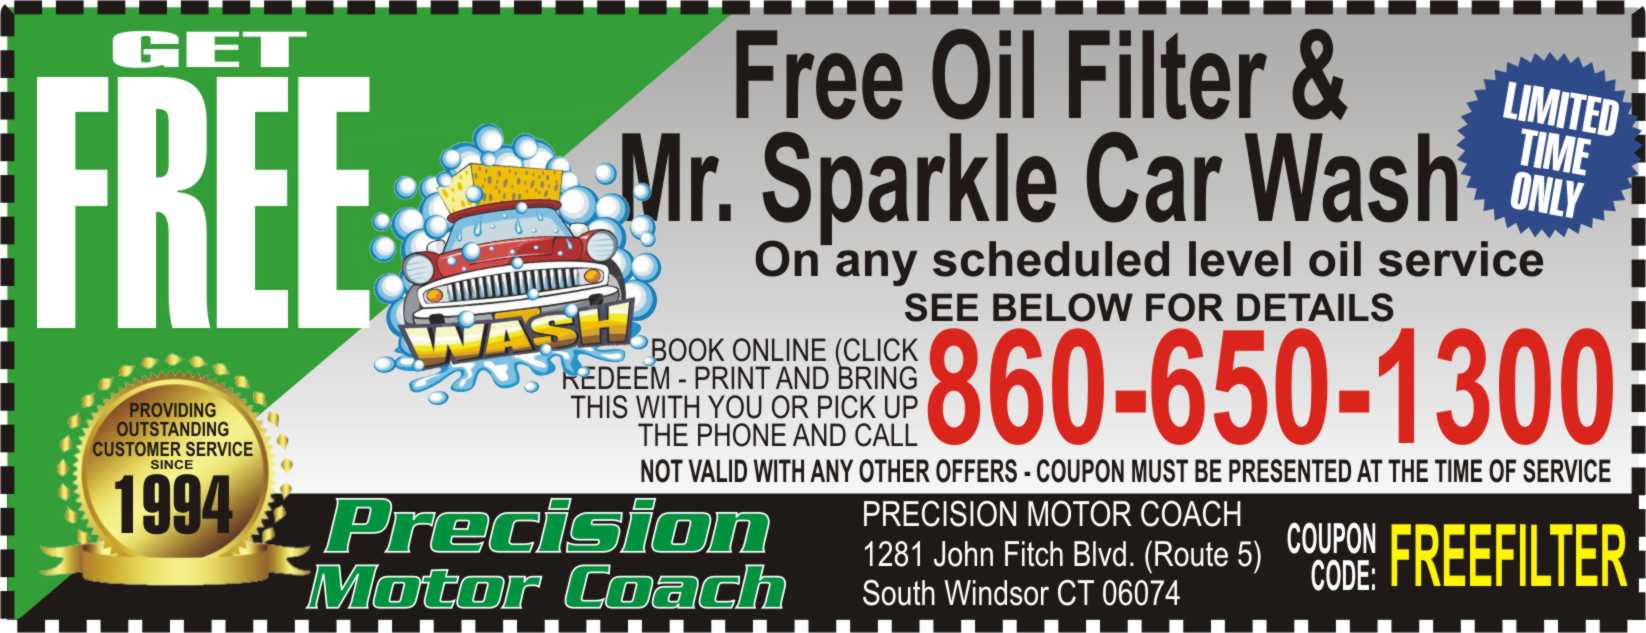 Coupons Oil Change Coupons Save money with these coupons